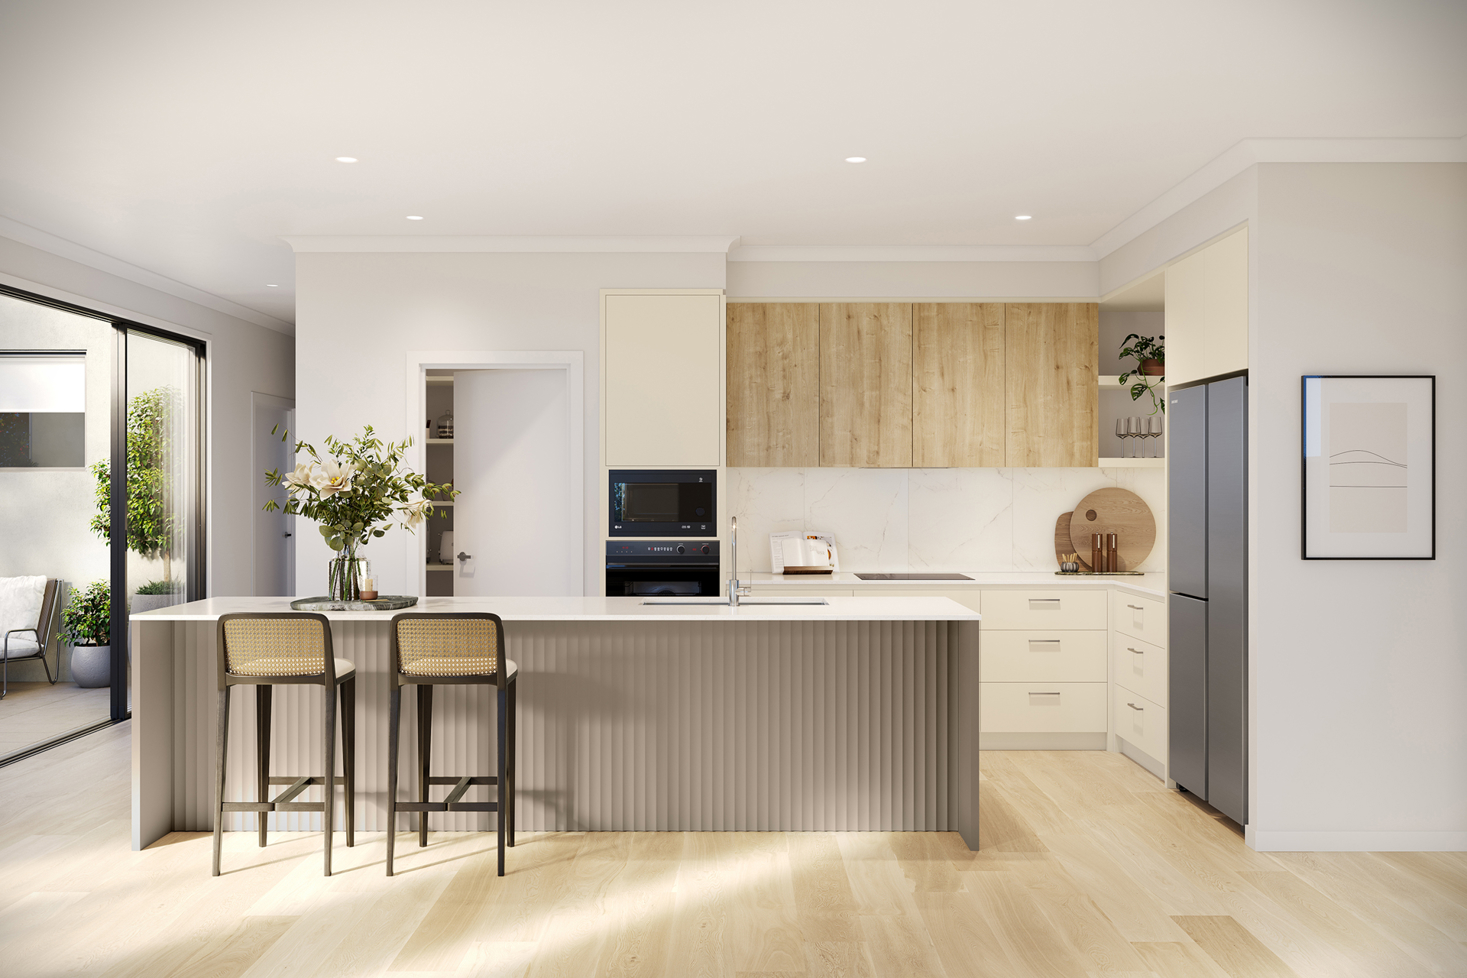 VH13 Kitchen render in Country colour